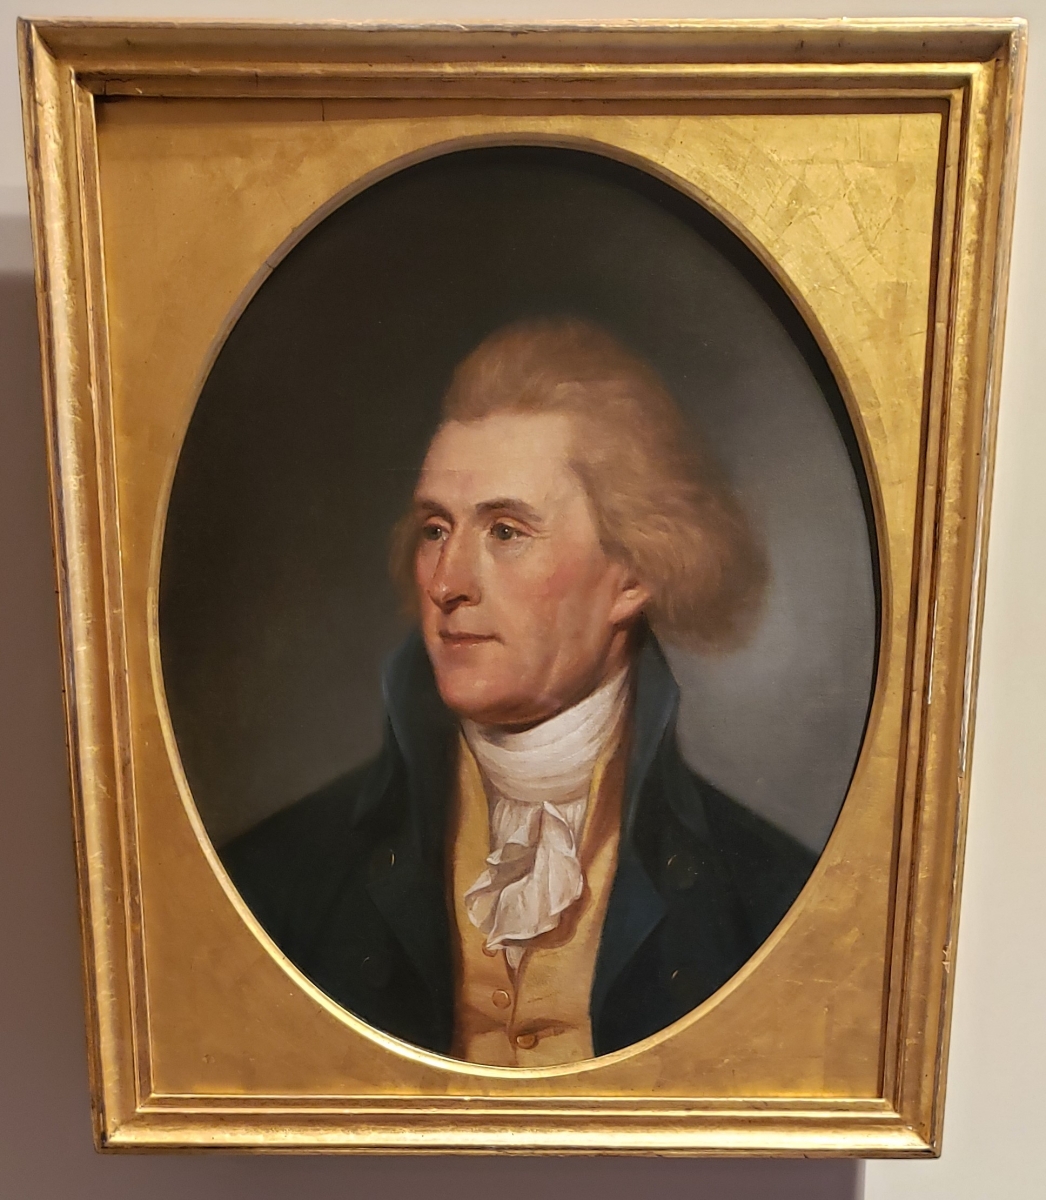 Portrait of Thomas Jefferson hanging in the Second Bank of the United States Portrait Gallery